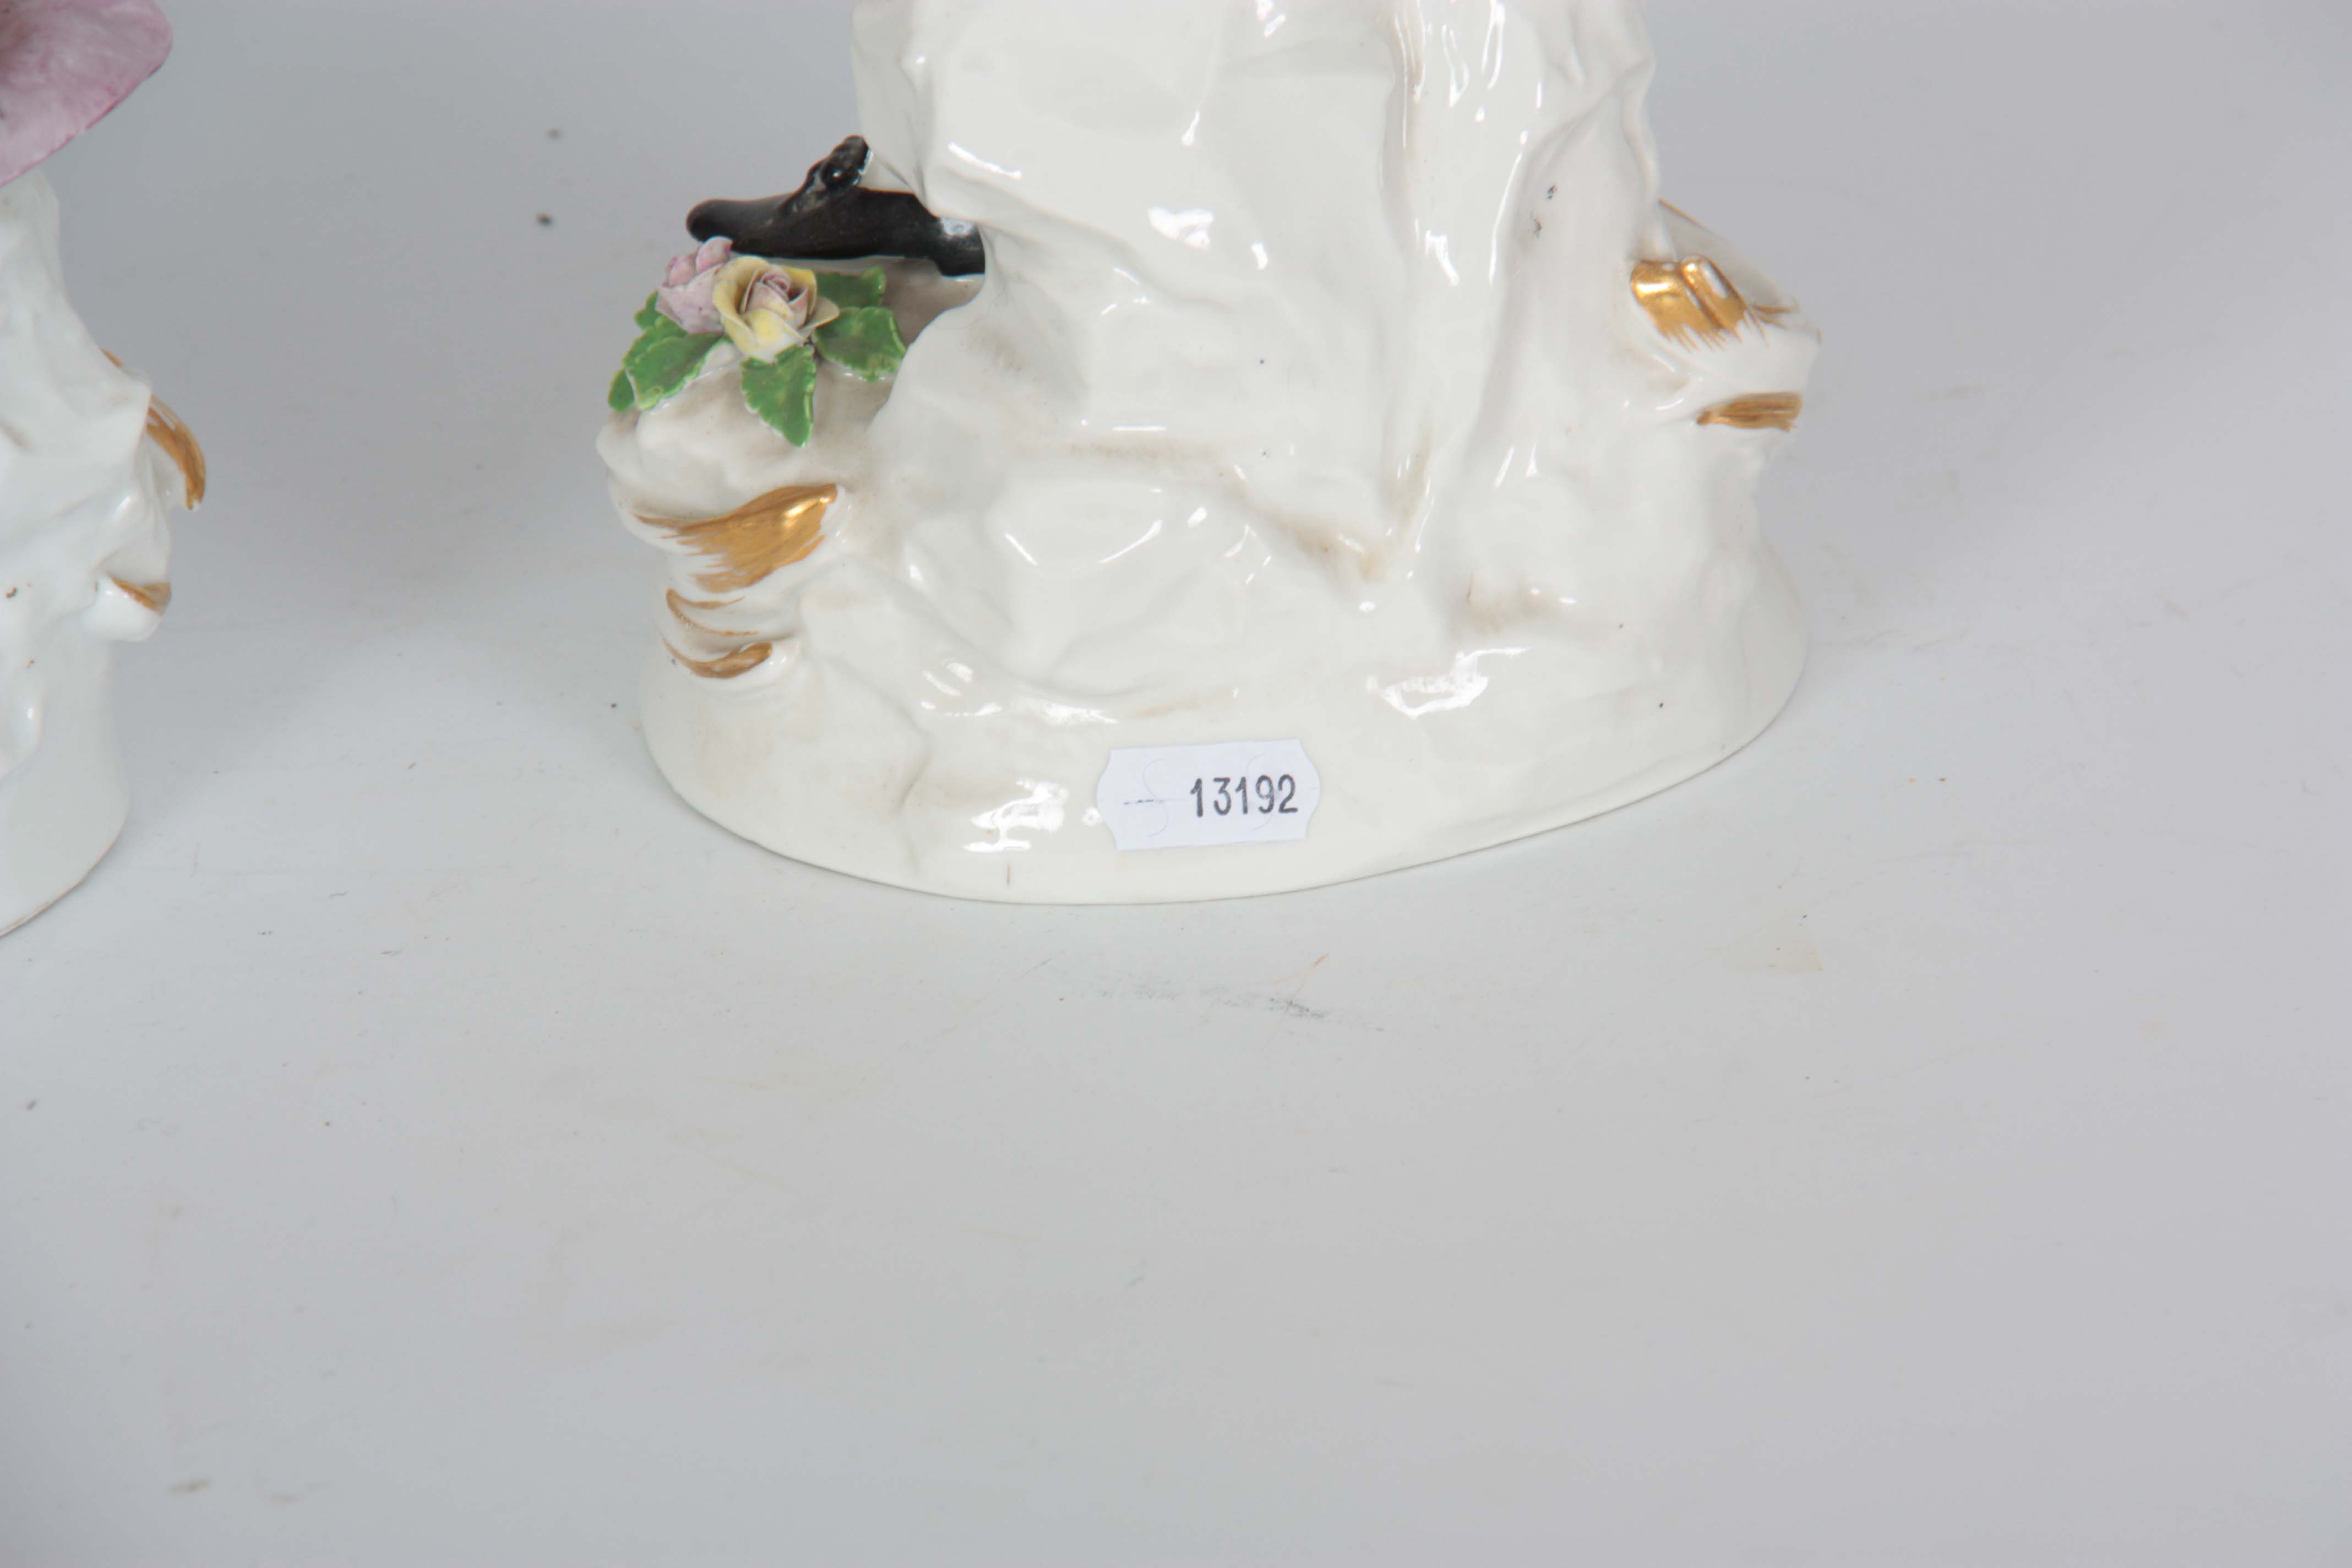 A PAIR OF LATE 19th CENTURY CONTINENTAL PORCELAIN FIGURES IN THE MEISSEN STYLE of two musicians in - Image 5 of 5